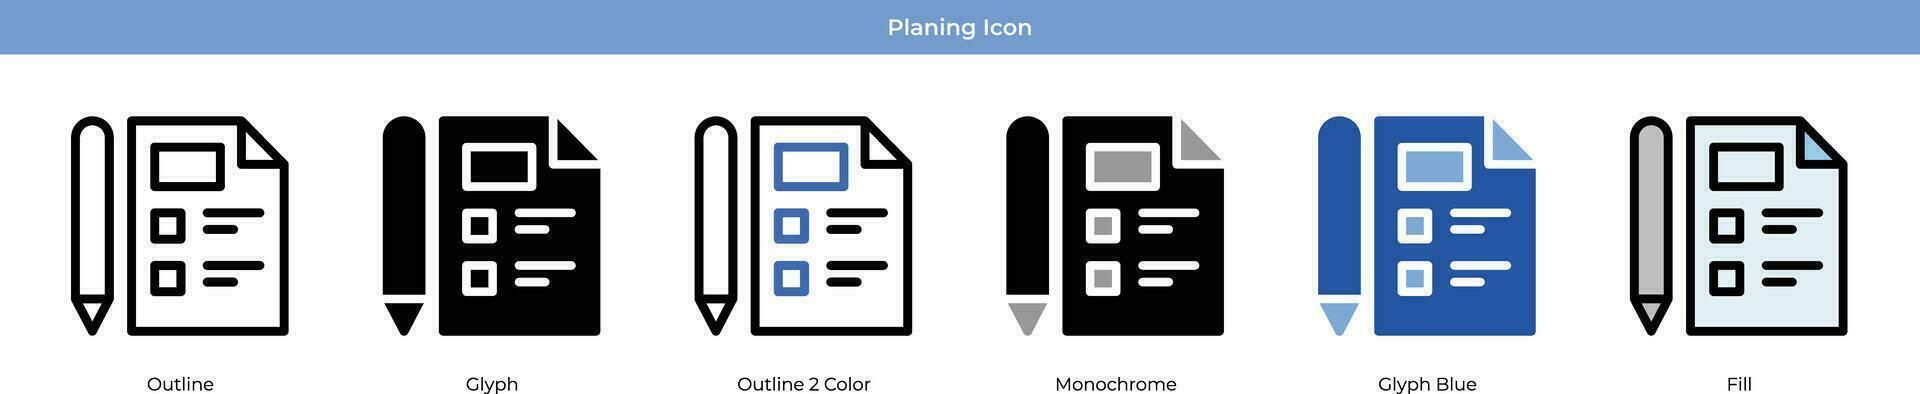 Planing Icon Set vector